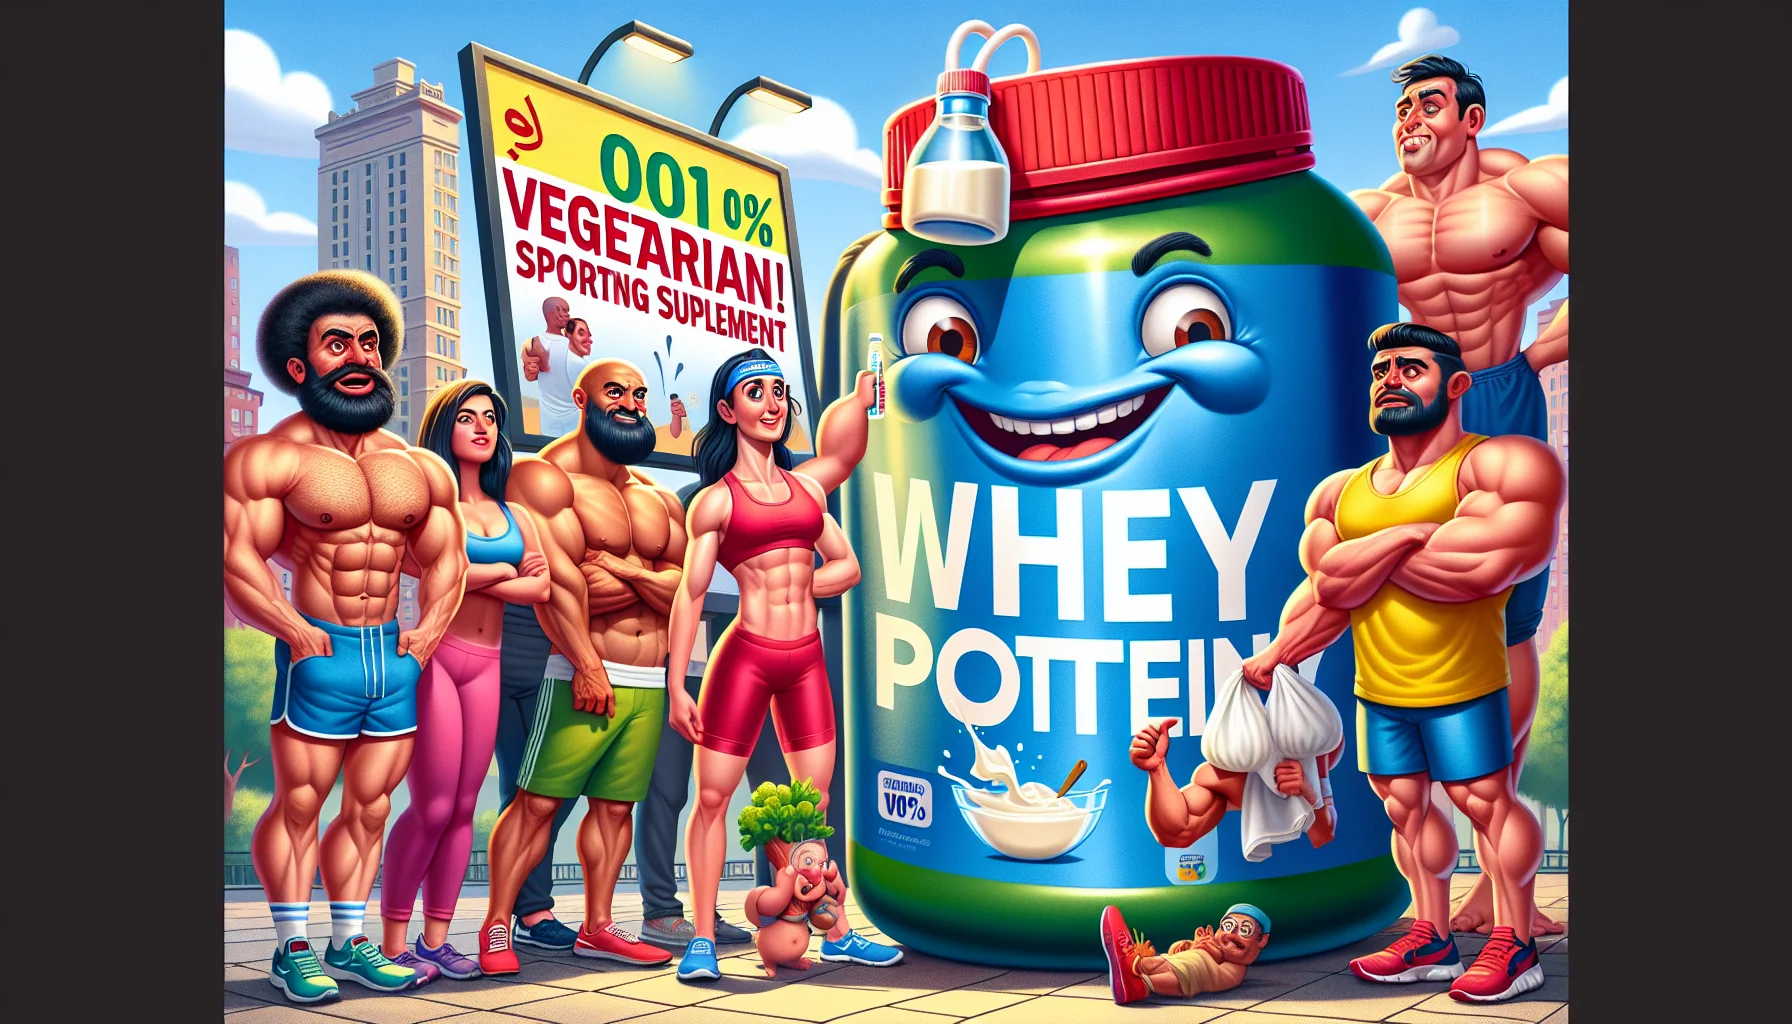 Illustrate a humorous scene where an animated giant jug of whey protein, adorned with a friendly smiling face, stands next to a billboard stating '100% Vegetarian!', encouraging passers-by to consider it for their sporting supplement needs. A varied group of people, including a Hispanic male bodybuilder, a Middle-Eastern female runner, a South Asian male cyclist, and a Caucasian female yoga practitioner, stand around, their facial expressions depicting surprise, curiosity, and amusement. Emphasize the vivid colors and dynamic composition to enhance the liveliness and fun, while maintaining a realistic feel.